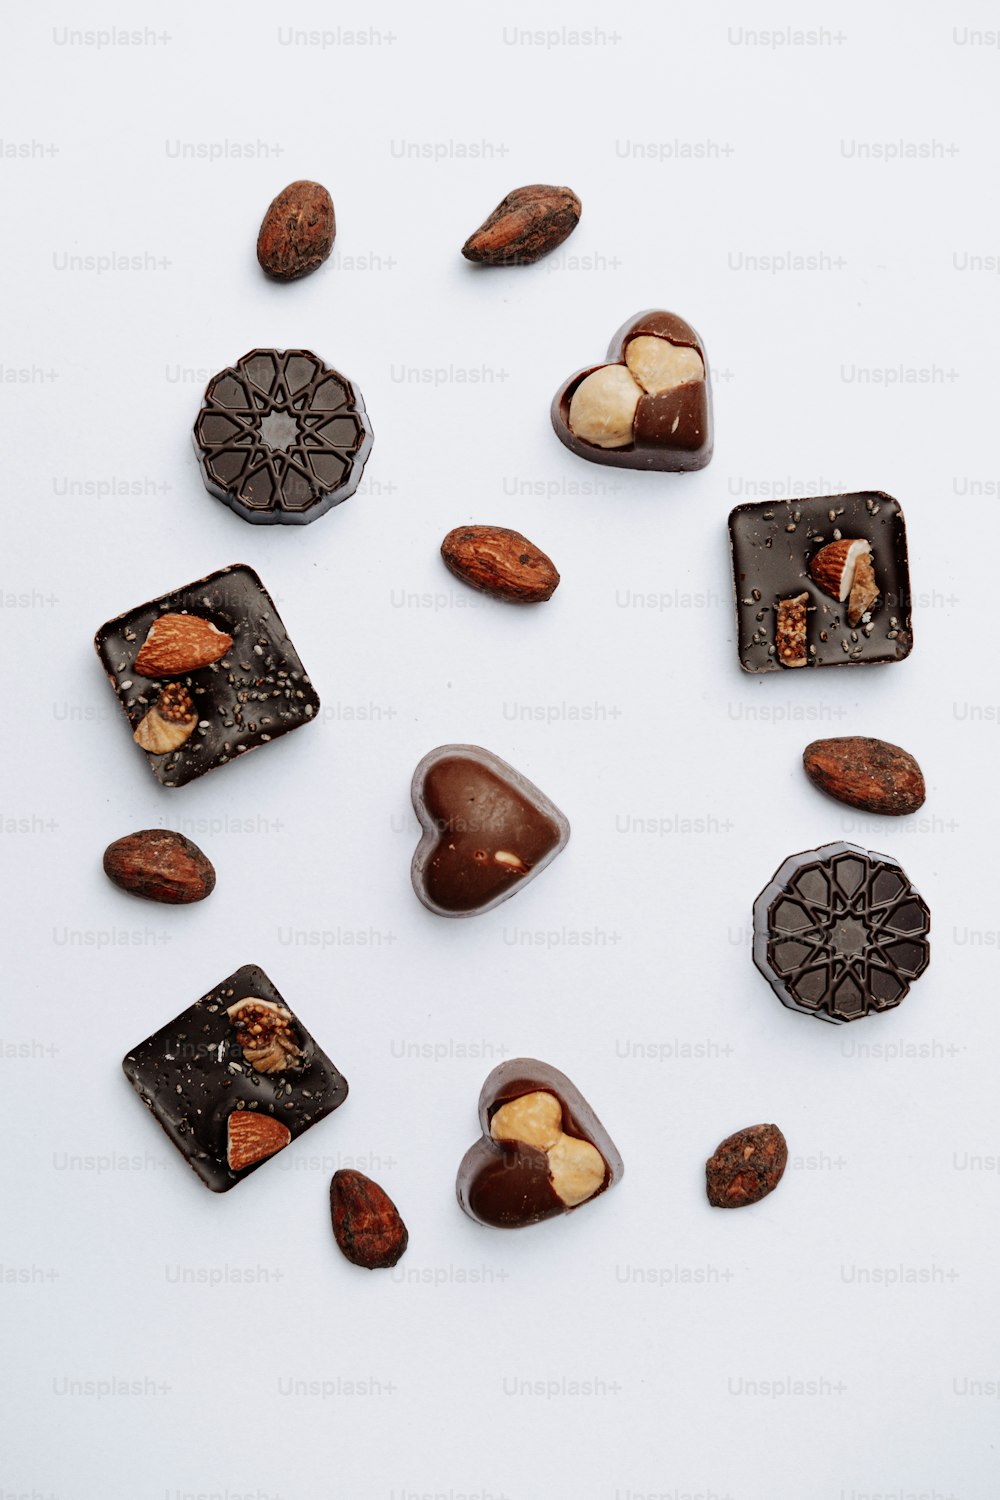 chocolates and nuts arranged in a circle on a white surface